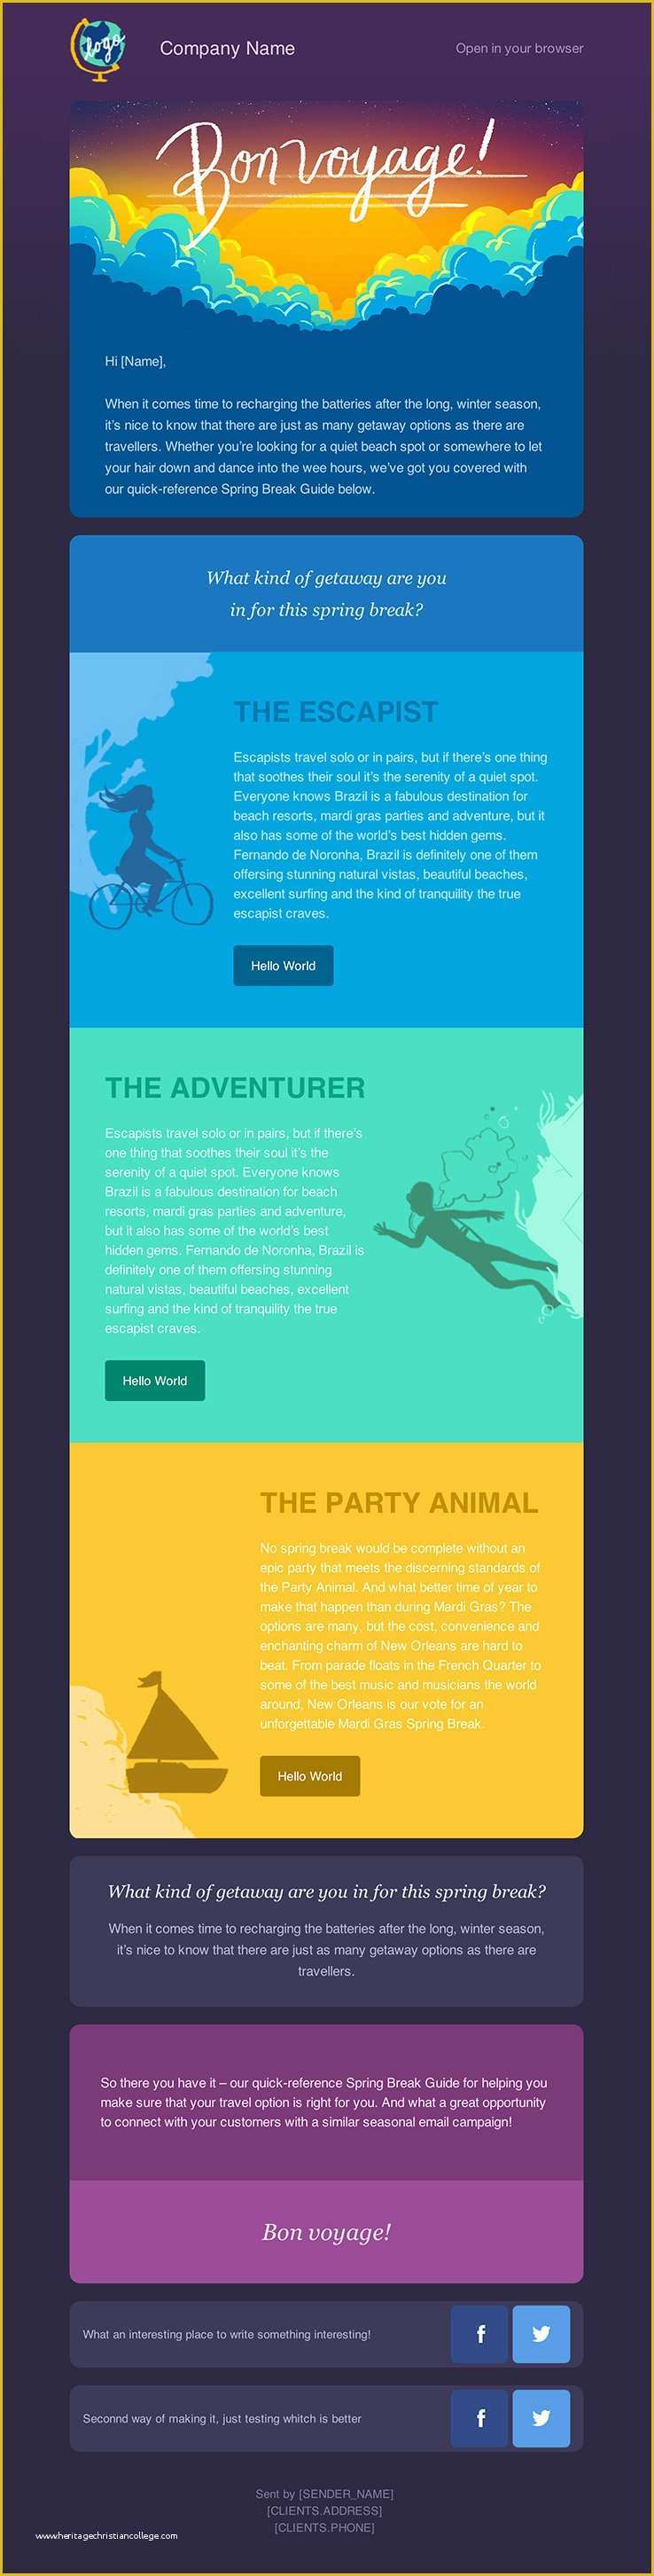 Best Free Email Newsletter Templates Of Free Business Newsletter Templates Portablegasgrillweber